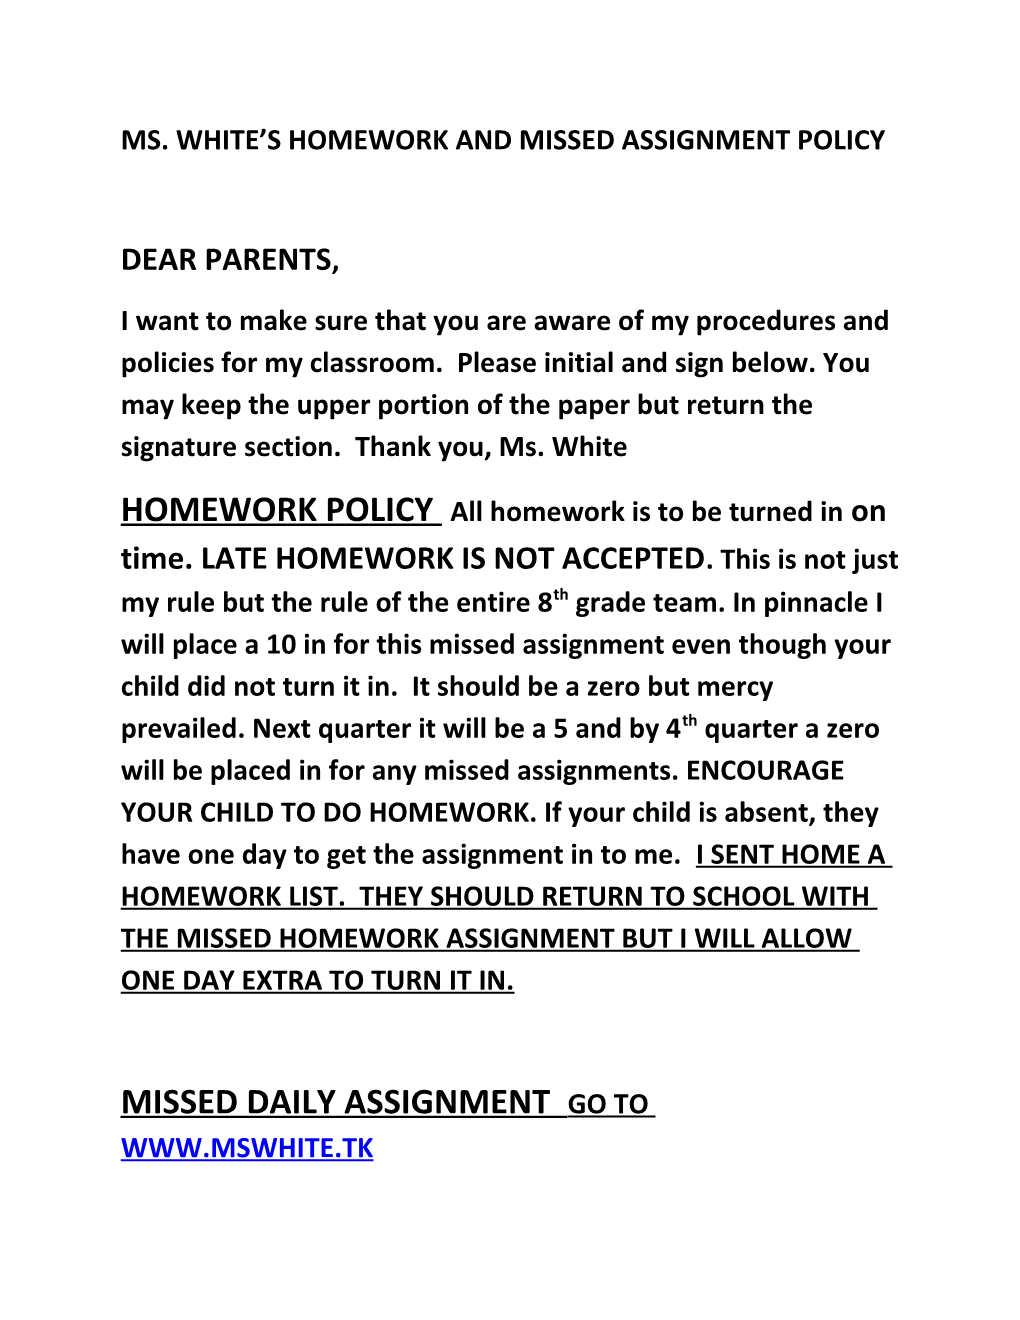 Ms. White S Homework and Missed Assignment Policy